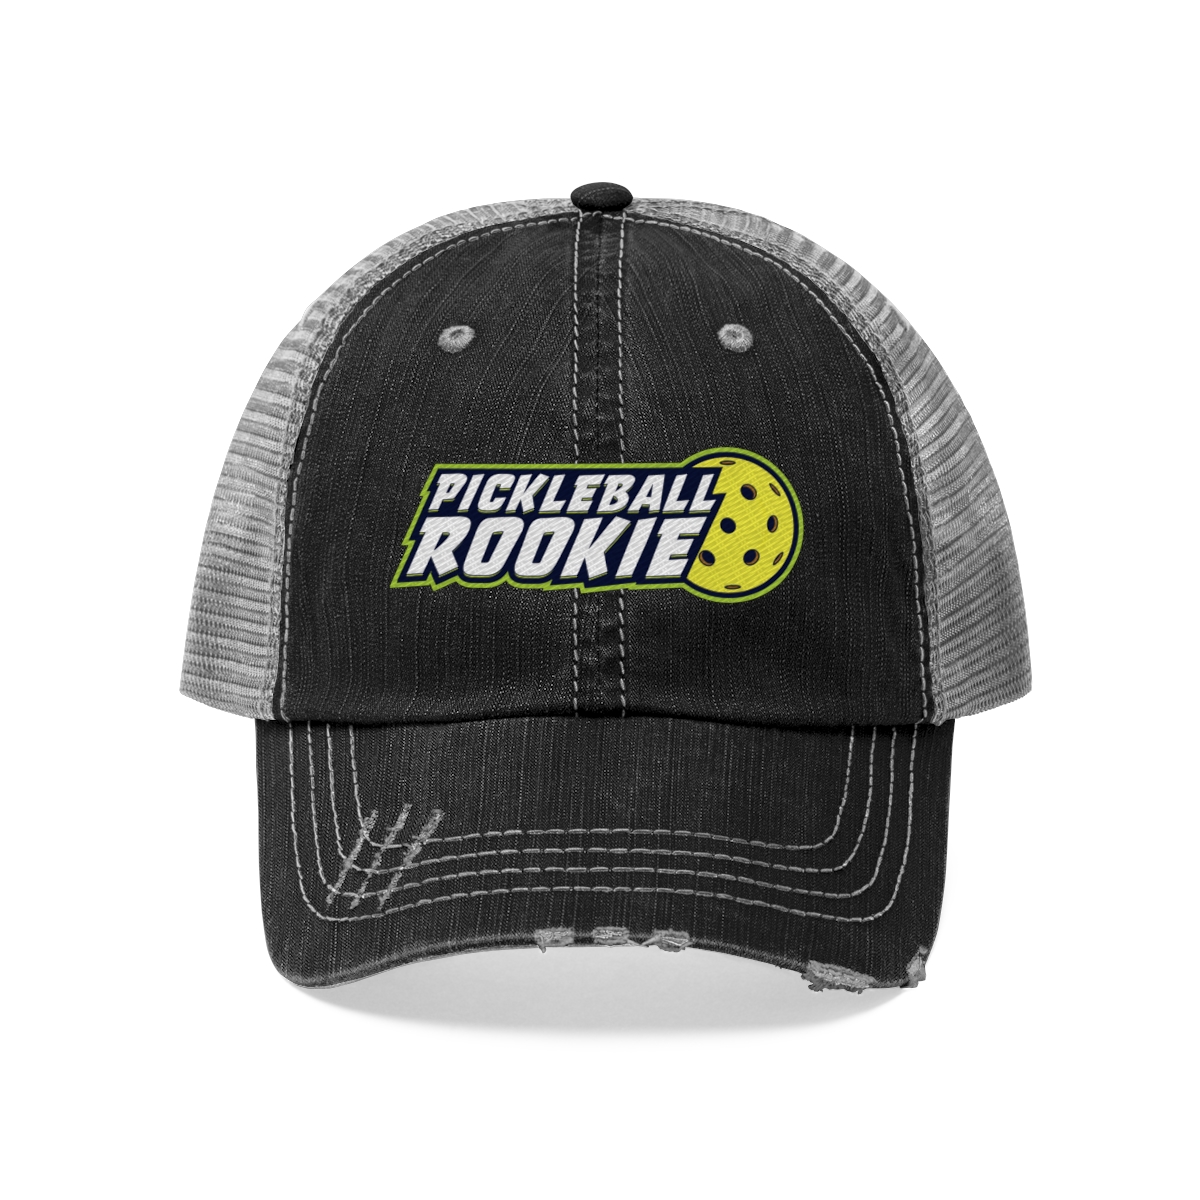 Pickleball Rookie - Core Unisex Trucker Hat product thumbnail image